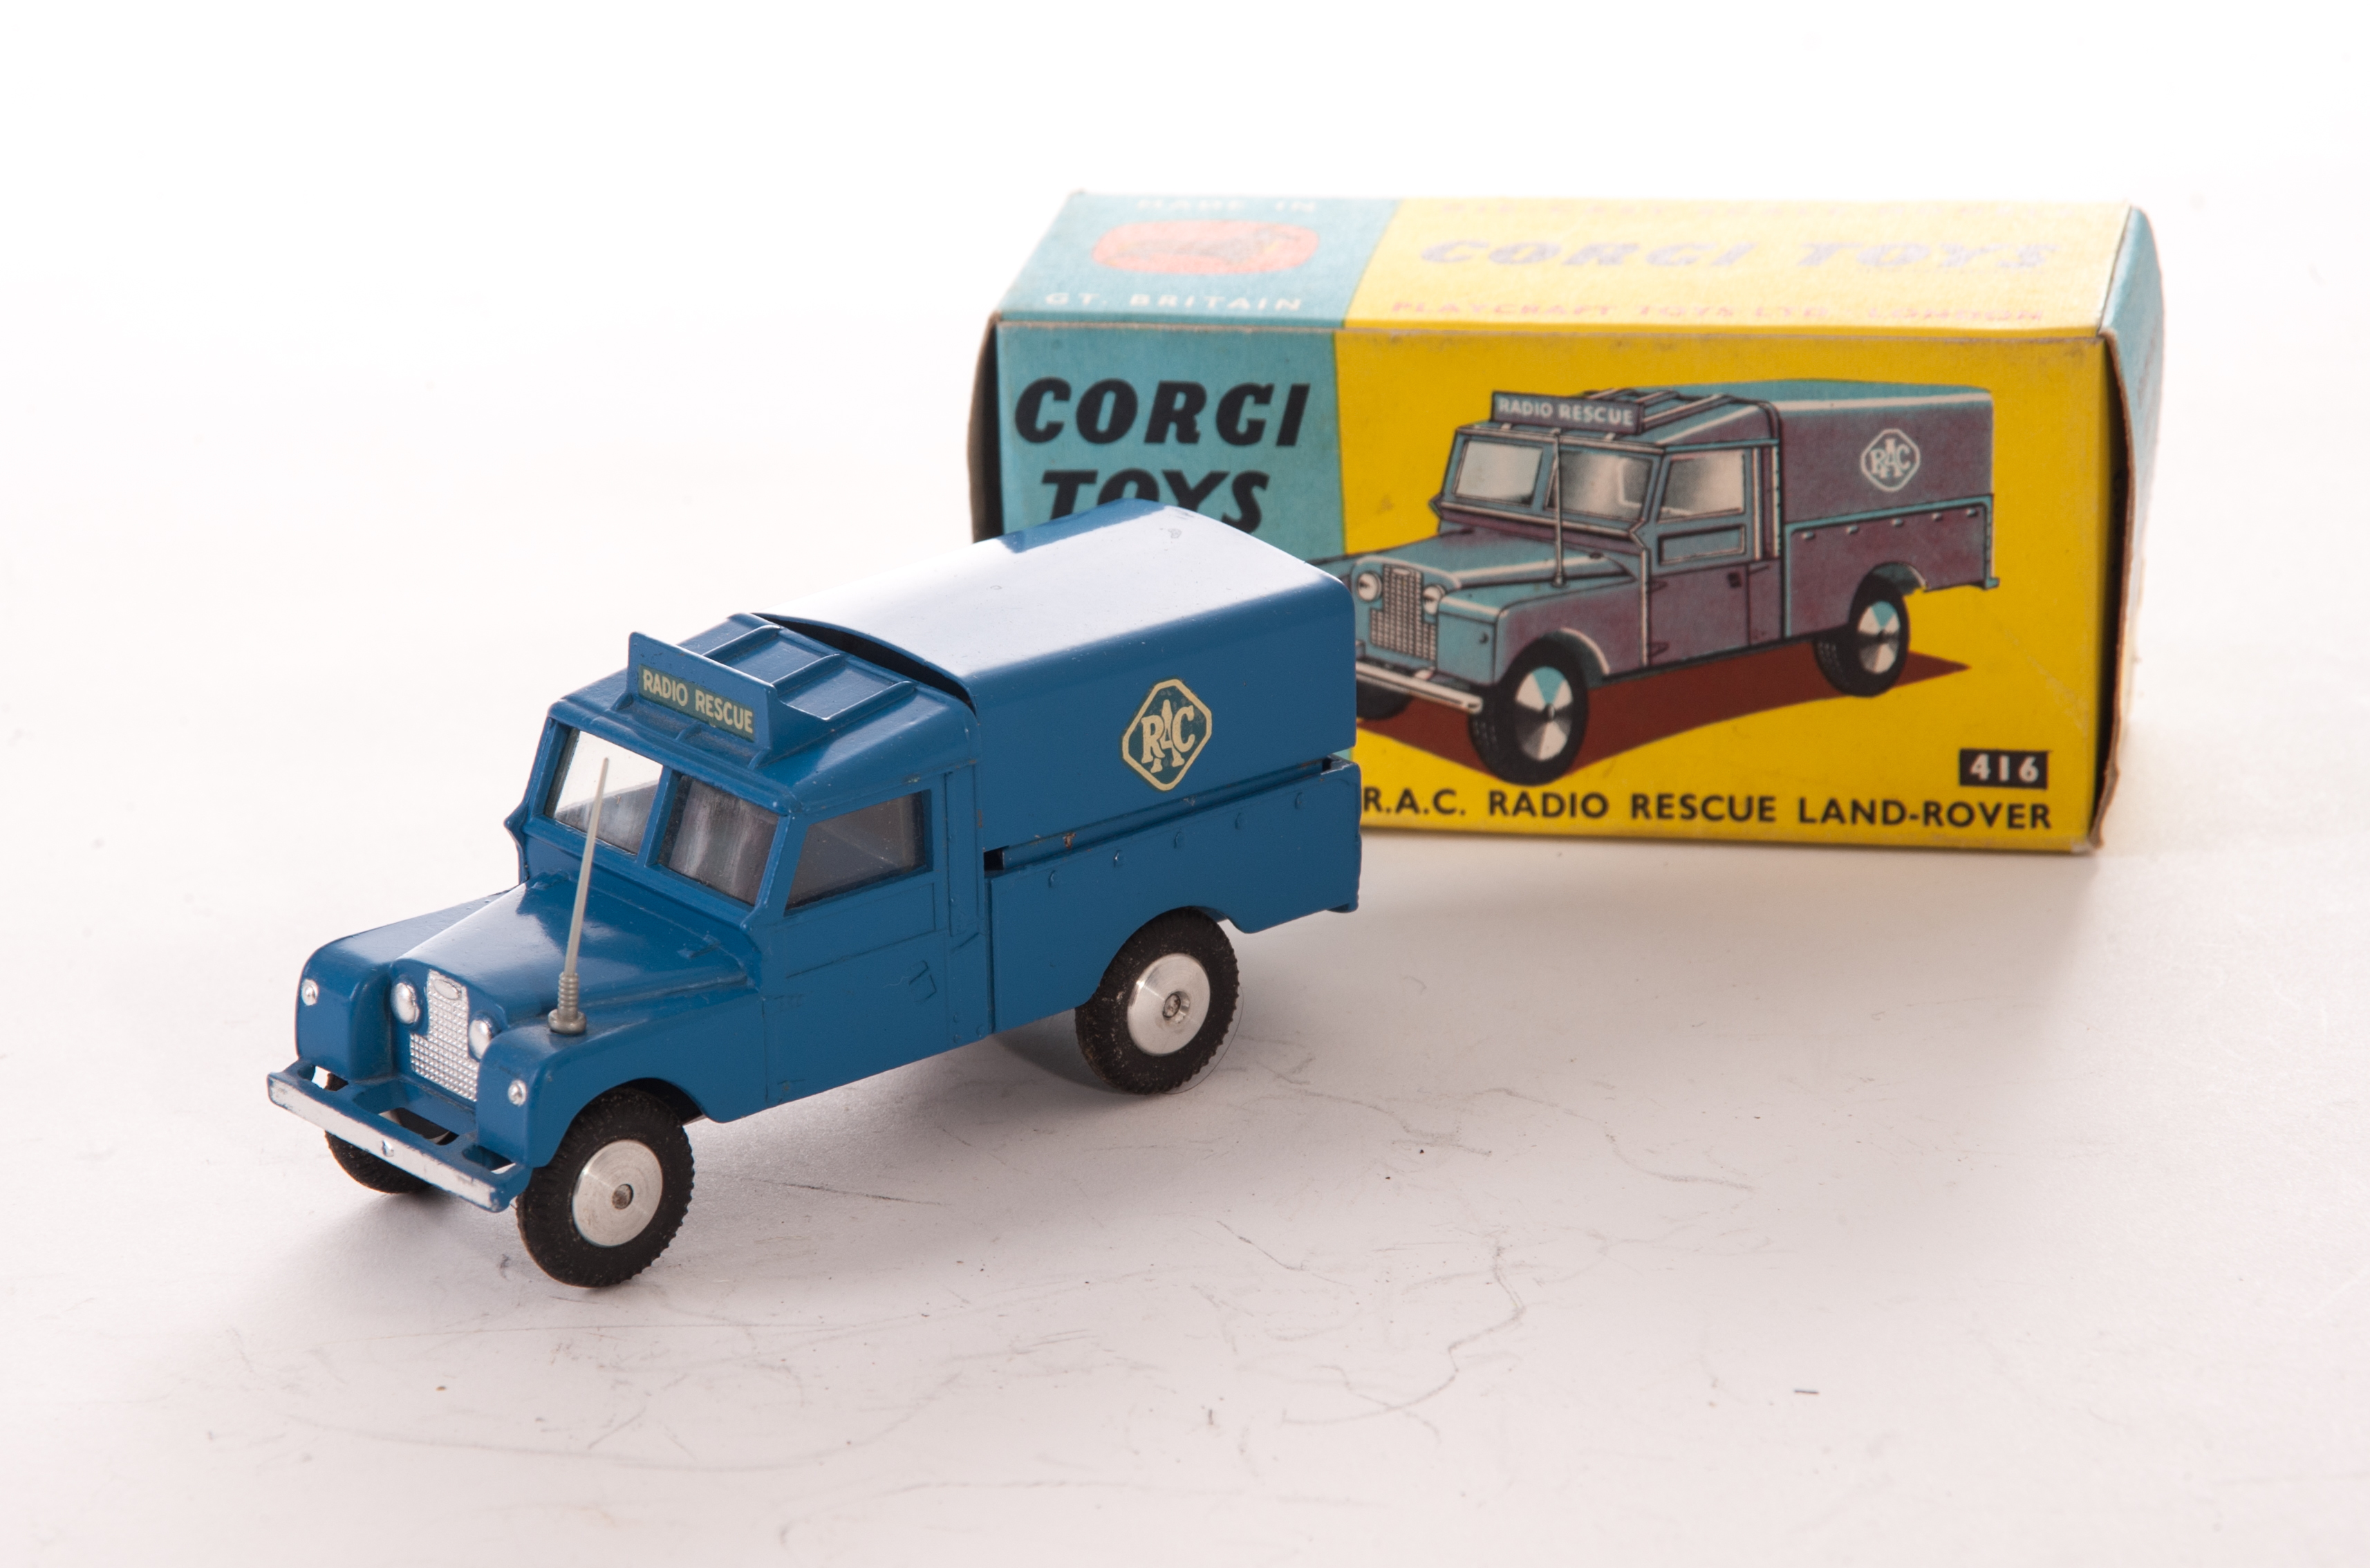 A Corgi Toys RAC Radio Rescue Land-Rover, in blue with aerial, in original yellow and blue picture